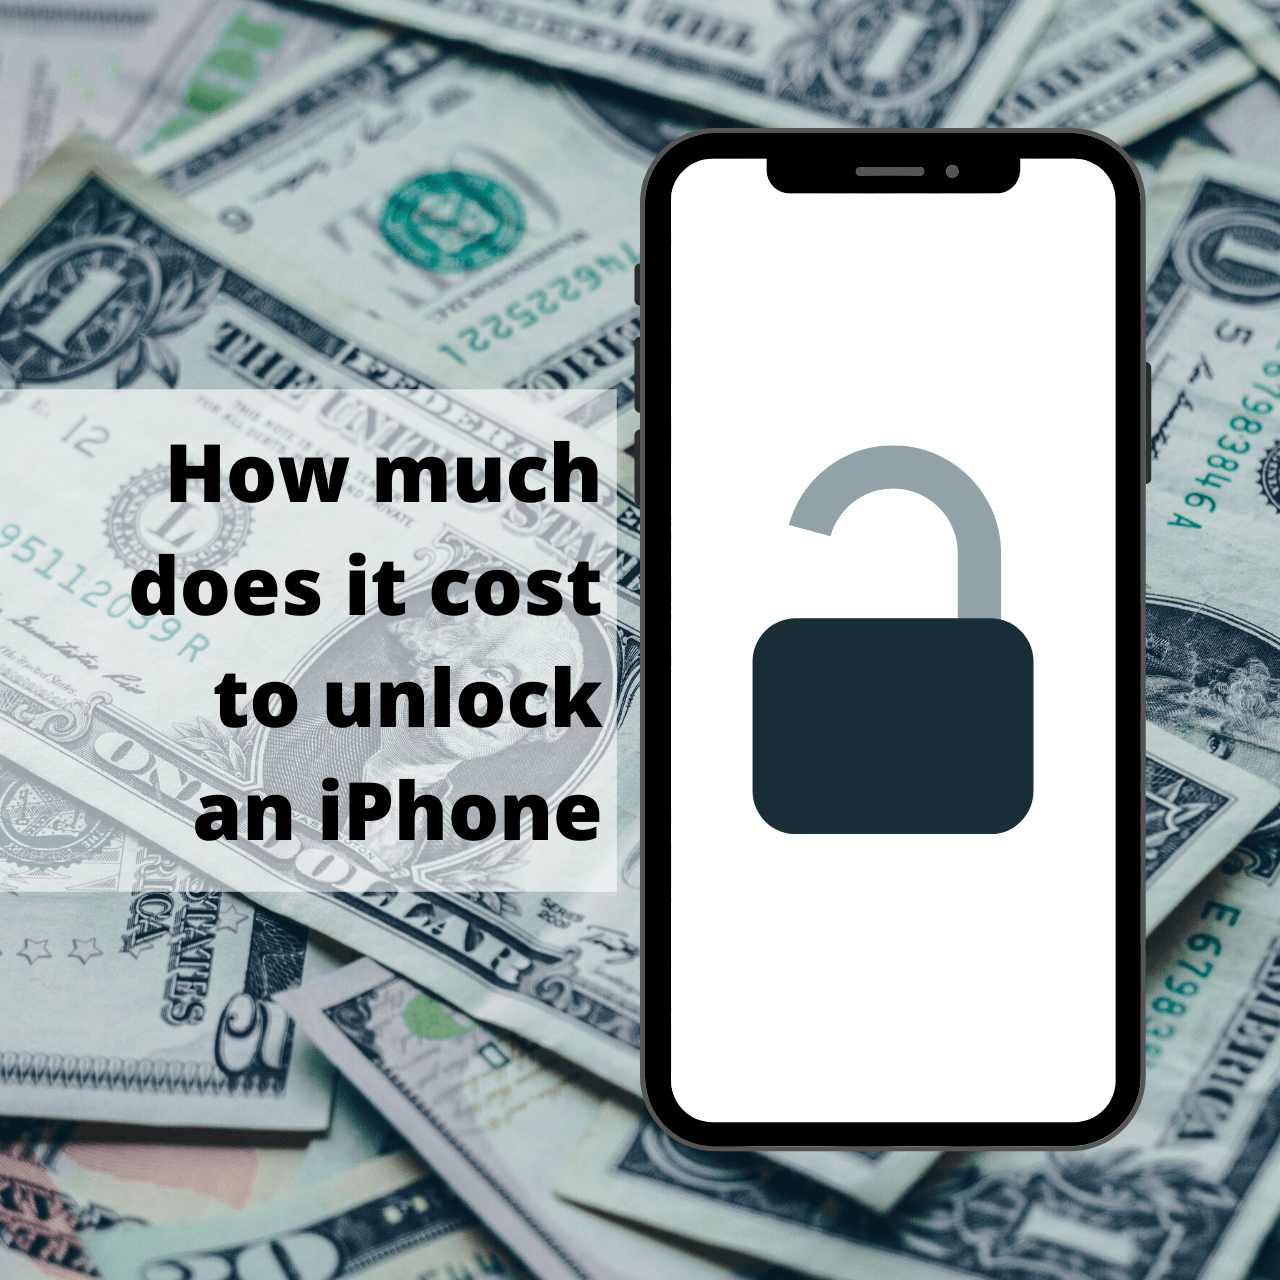 How much does it cost to unlock an iPhone